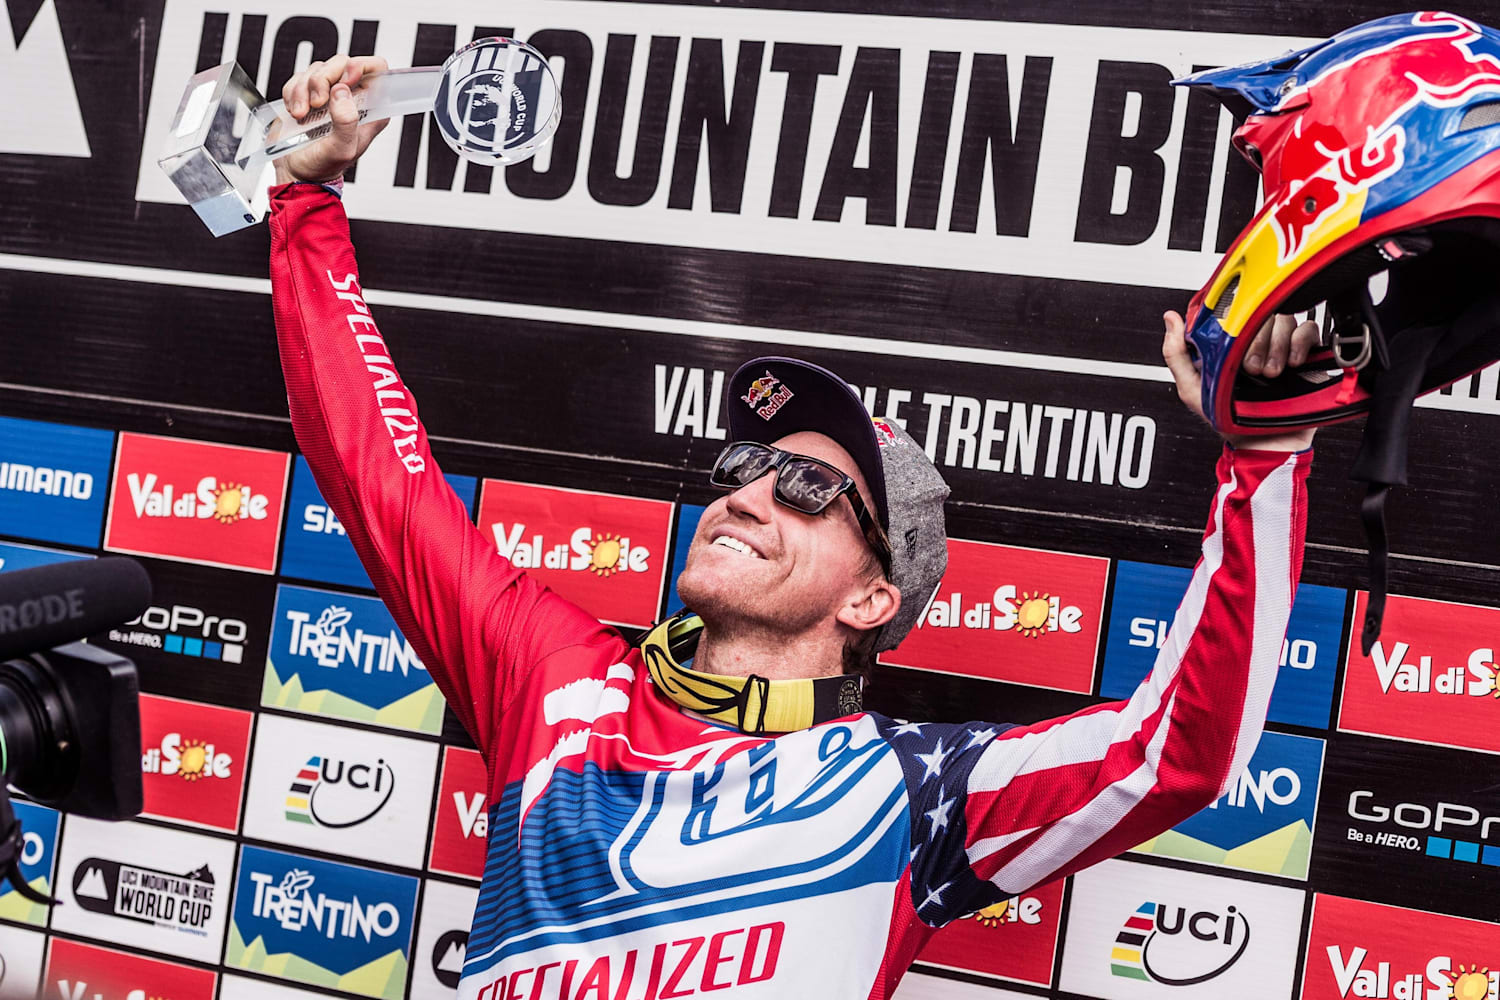 UCI World Cup 2016 preview and best bits